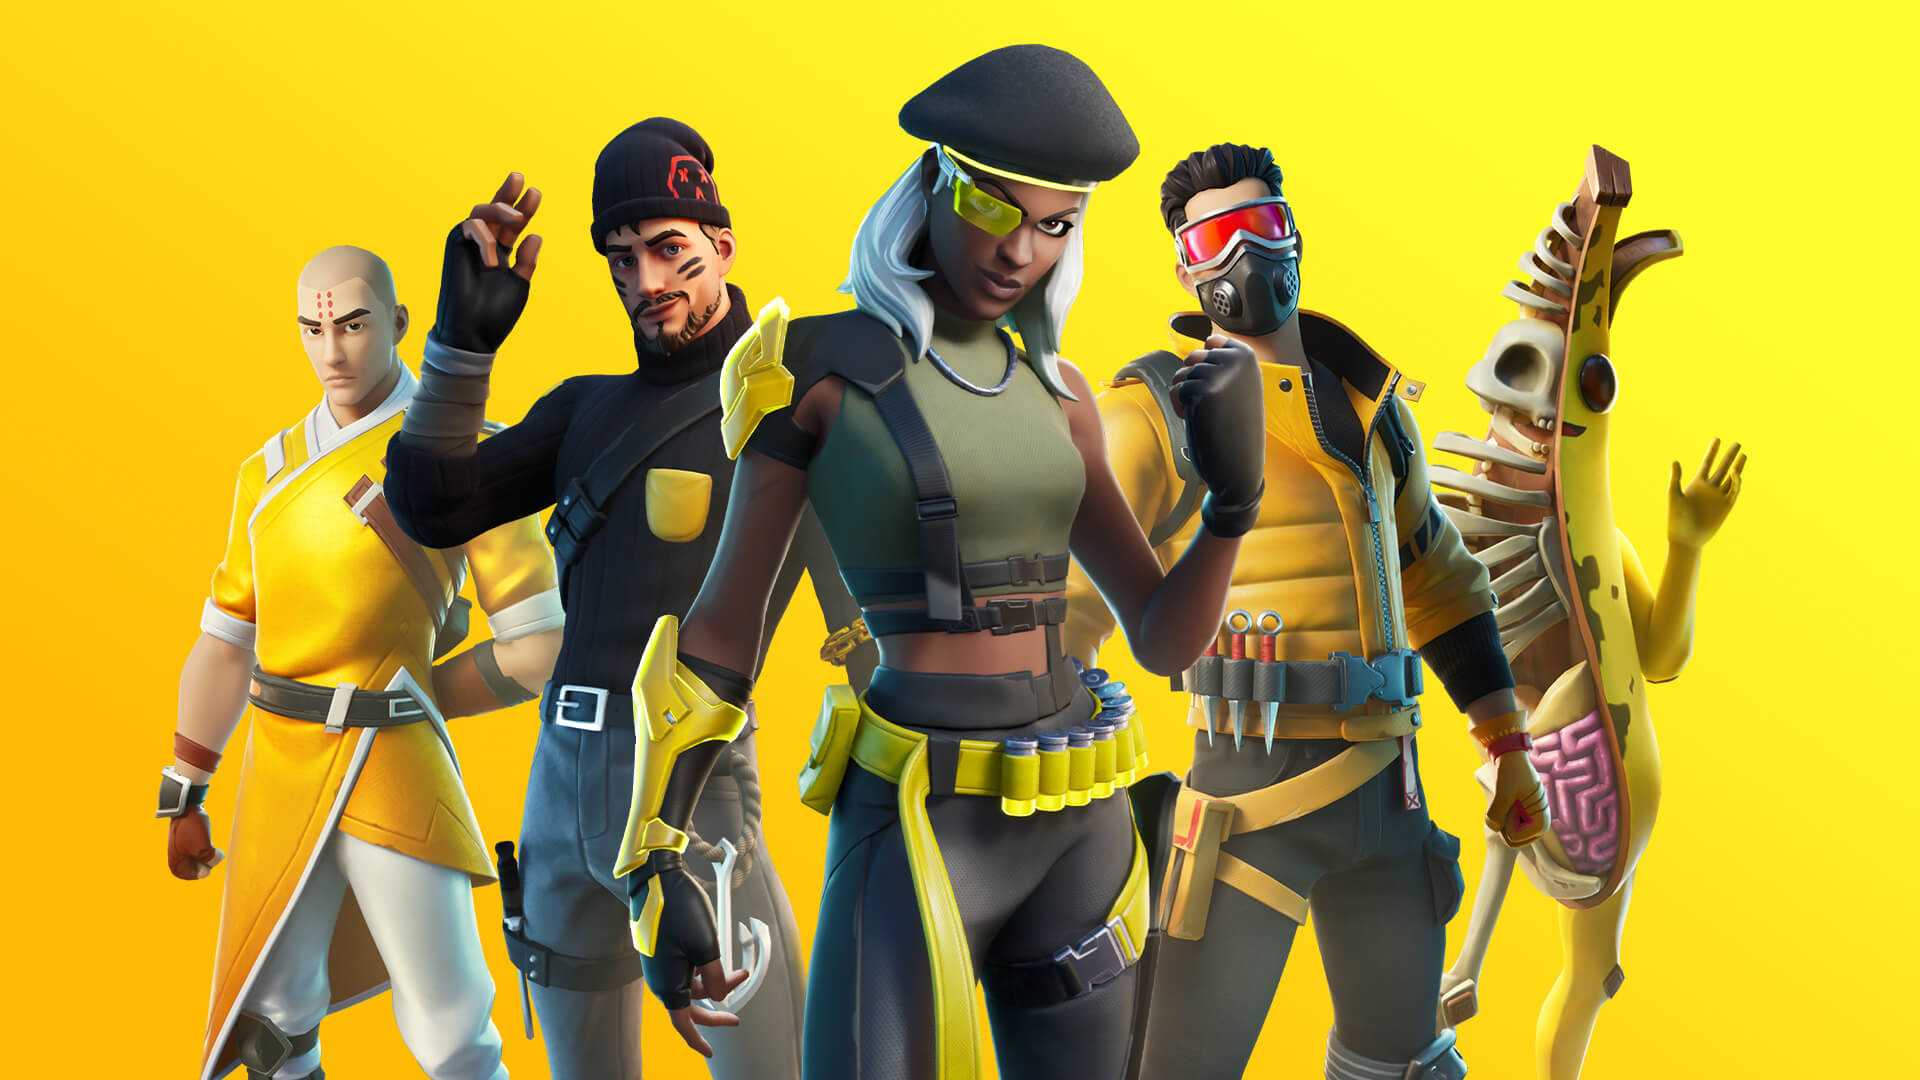 Fortnite 50v50 mode returning to battle royale, with a twist